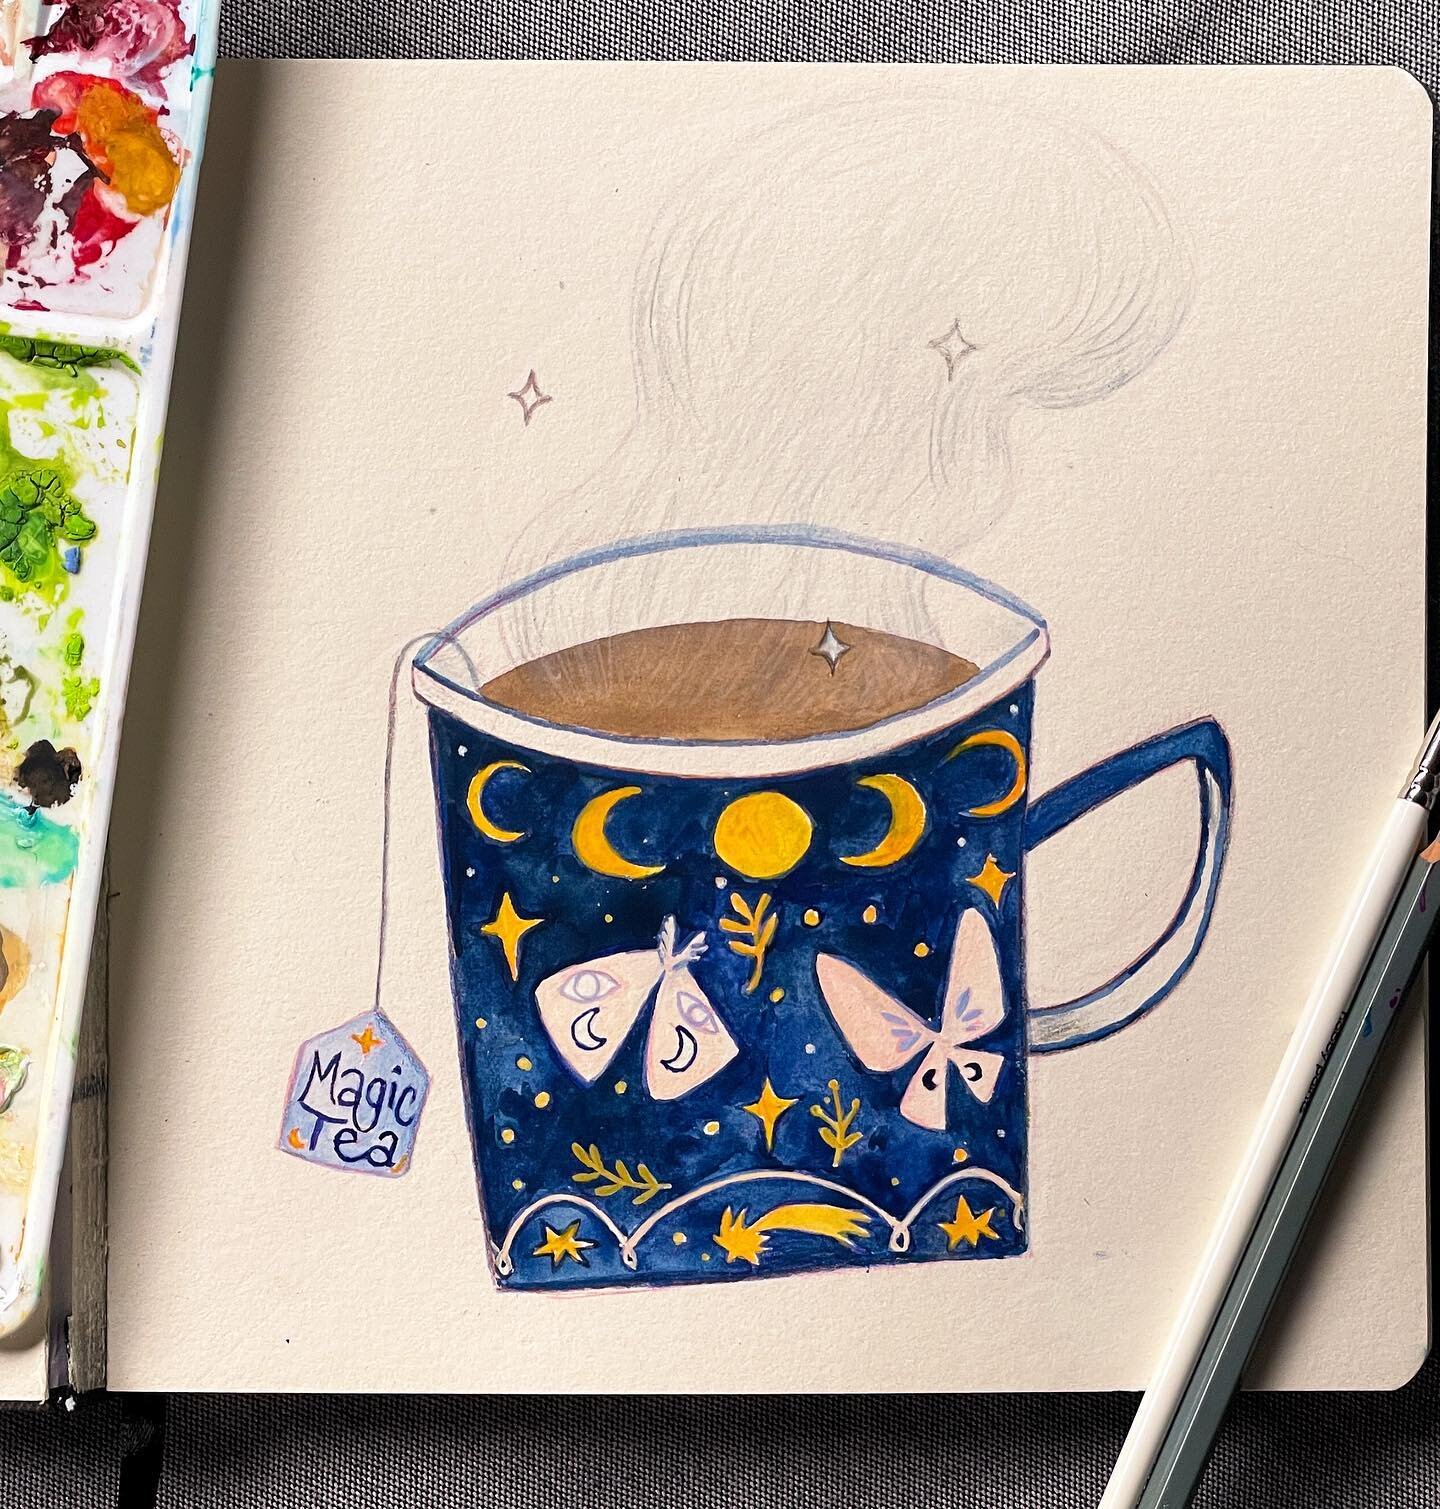 Have a magic cup of tea to make your day better 🥰☕️🫖

#illustration #picturebook #cozy #teaparty #tea #moon